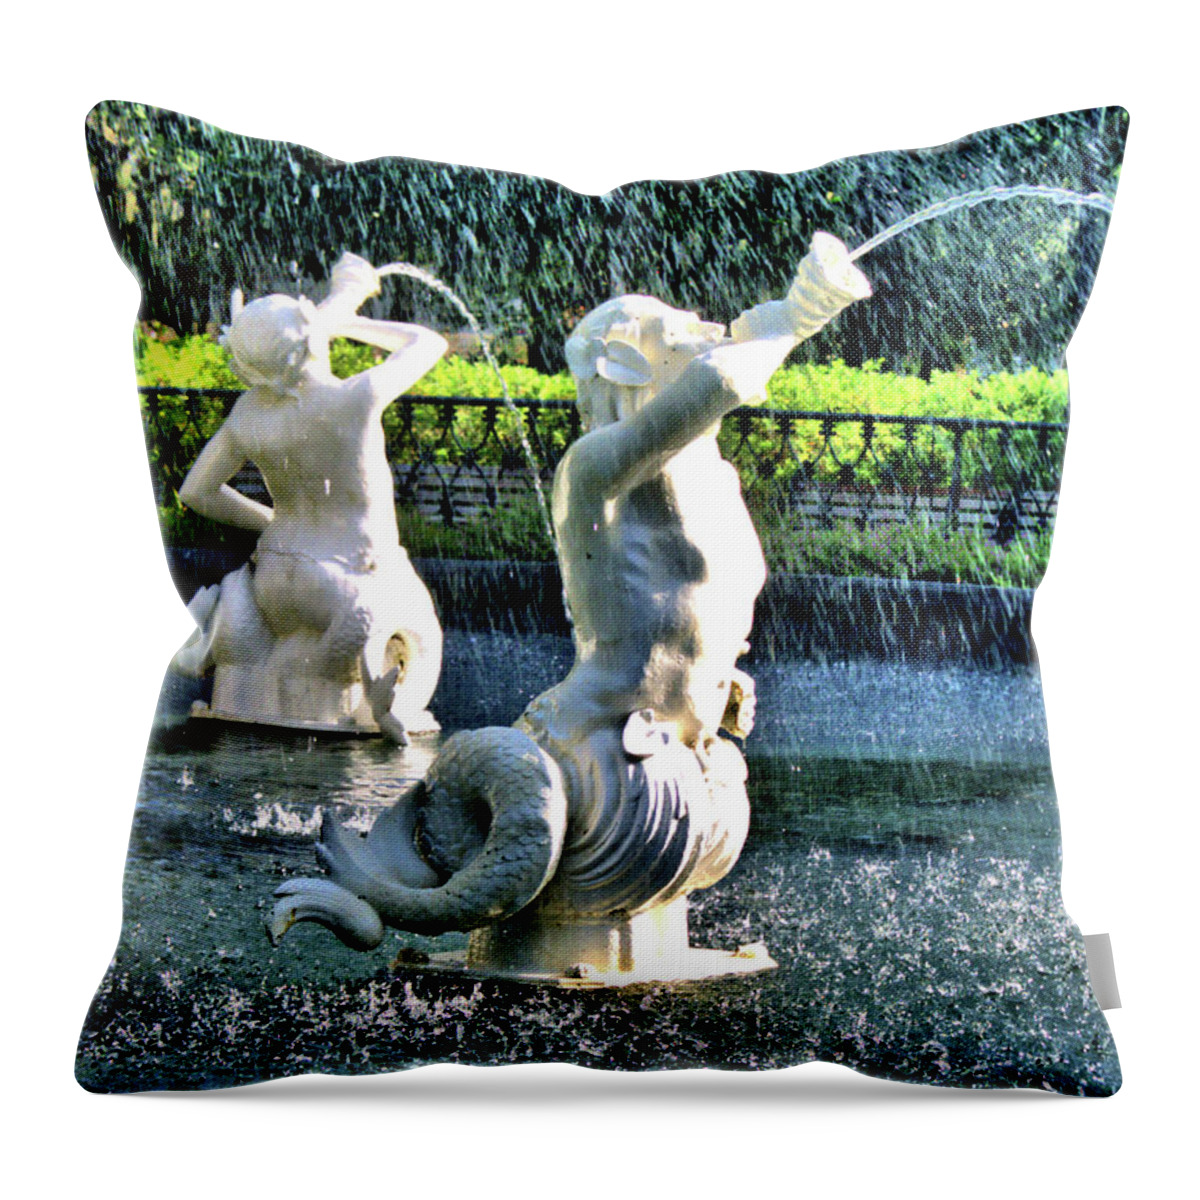 Mermaids Throw Pillow featuring the photograph Mermaids by Theresa Fairchild